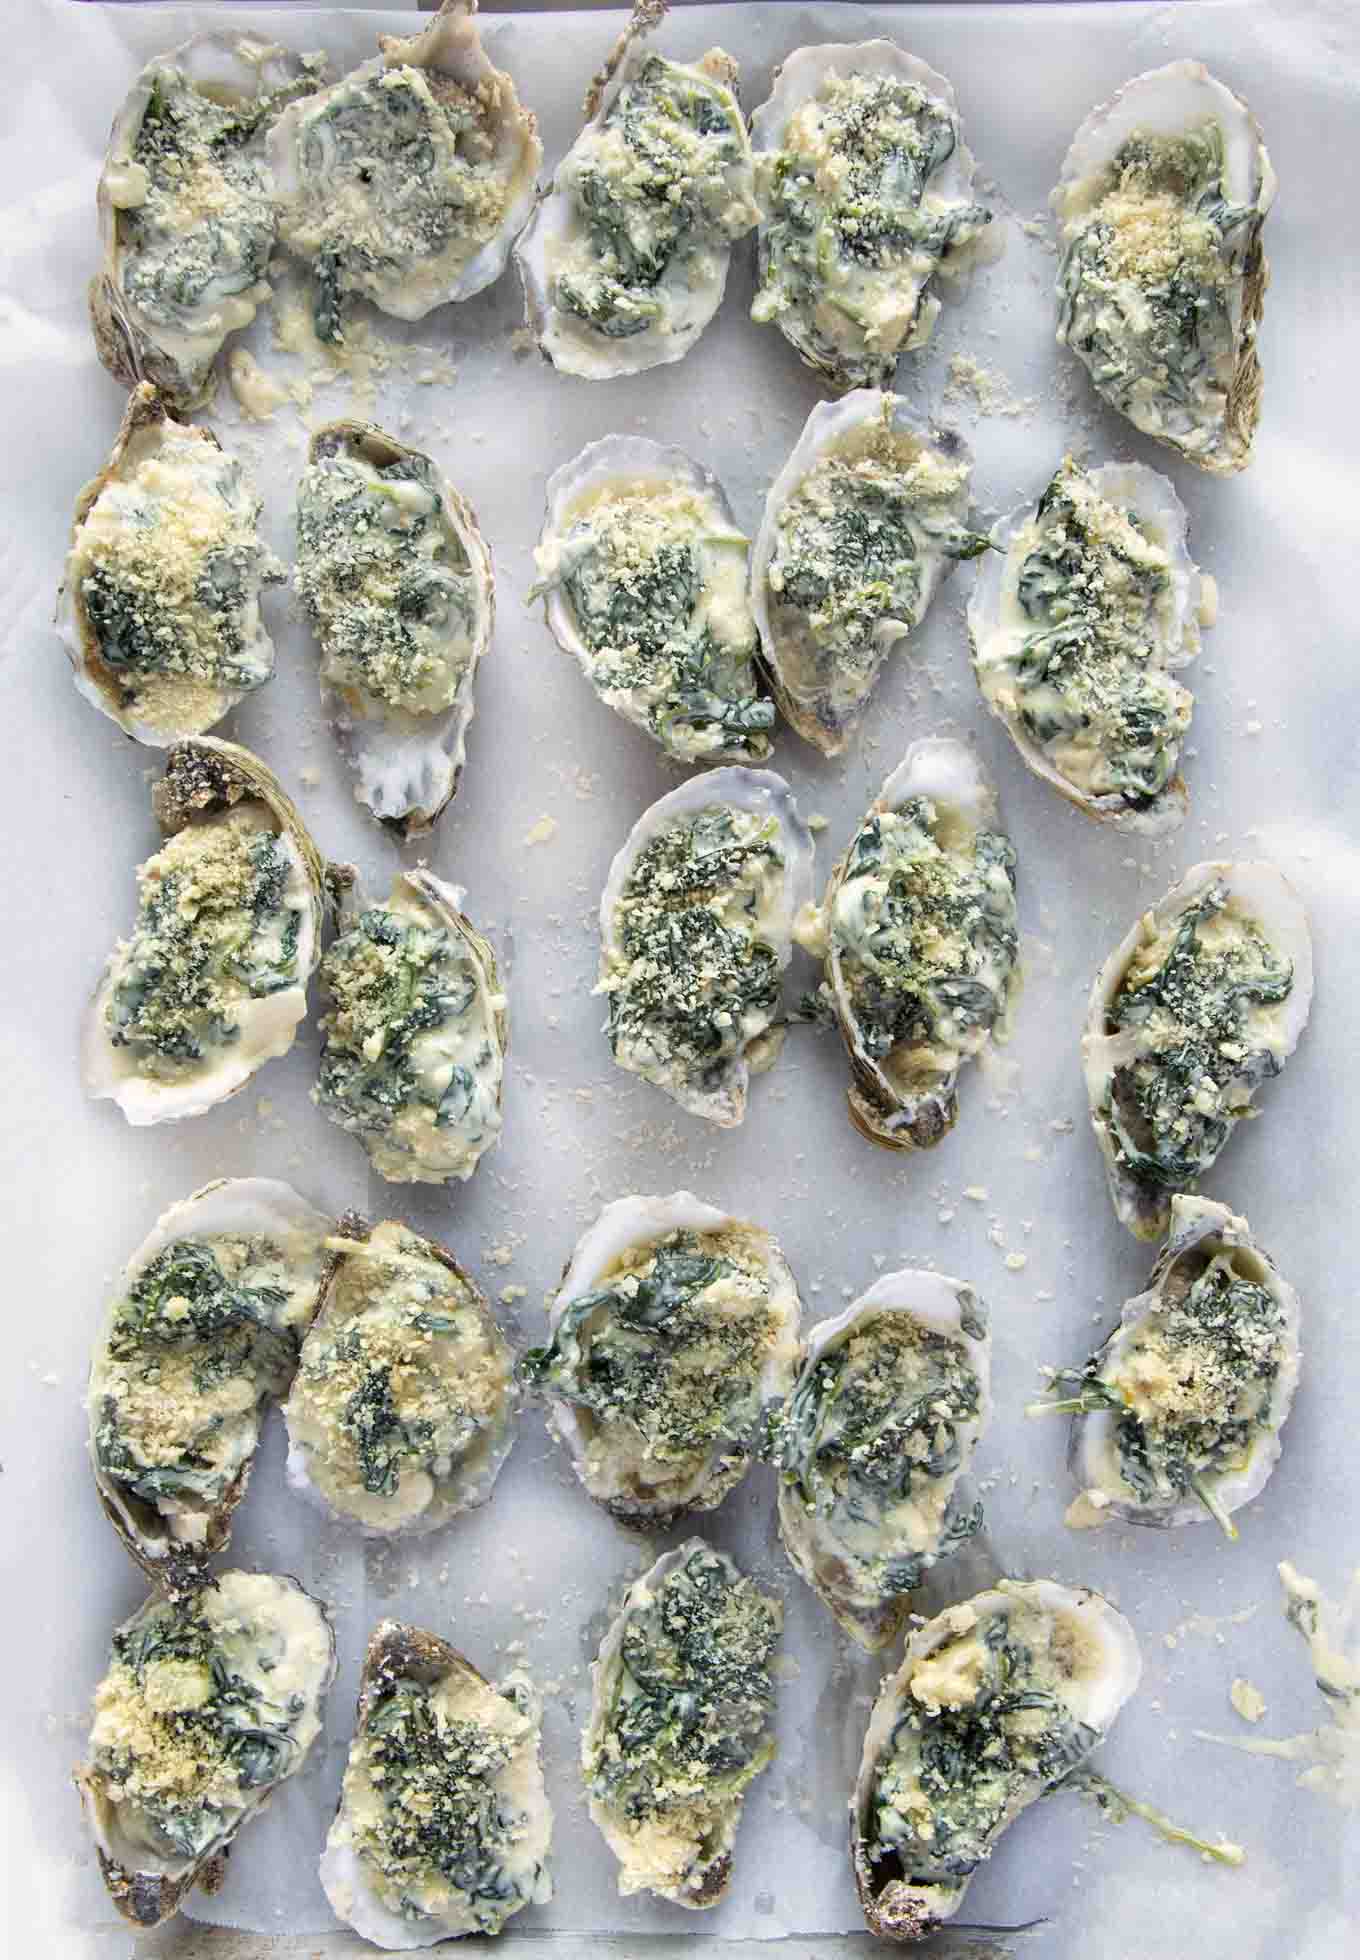 Bodega Bay Oyster Company - Oyster Grill Pans are back! You can make Oyster  Rockefeller in the oven, chill the plate and serve oysters on the half  shell, or skip the shellfish